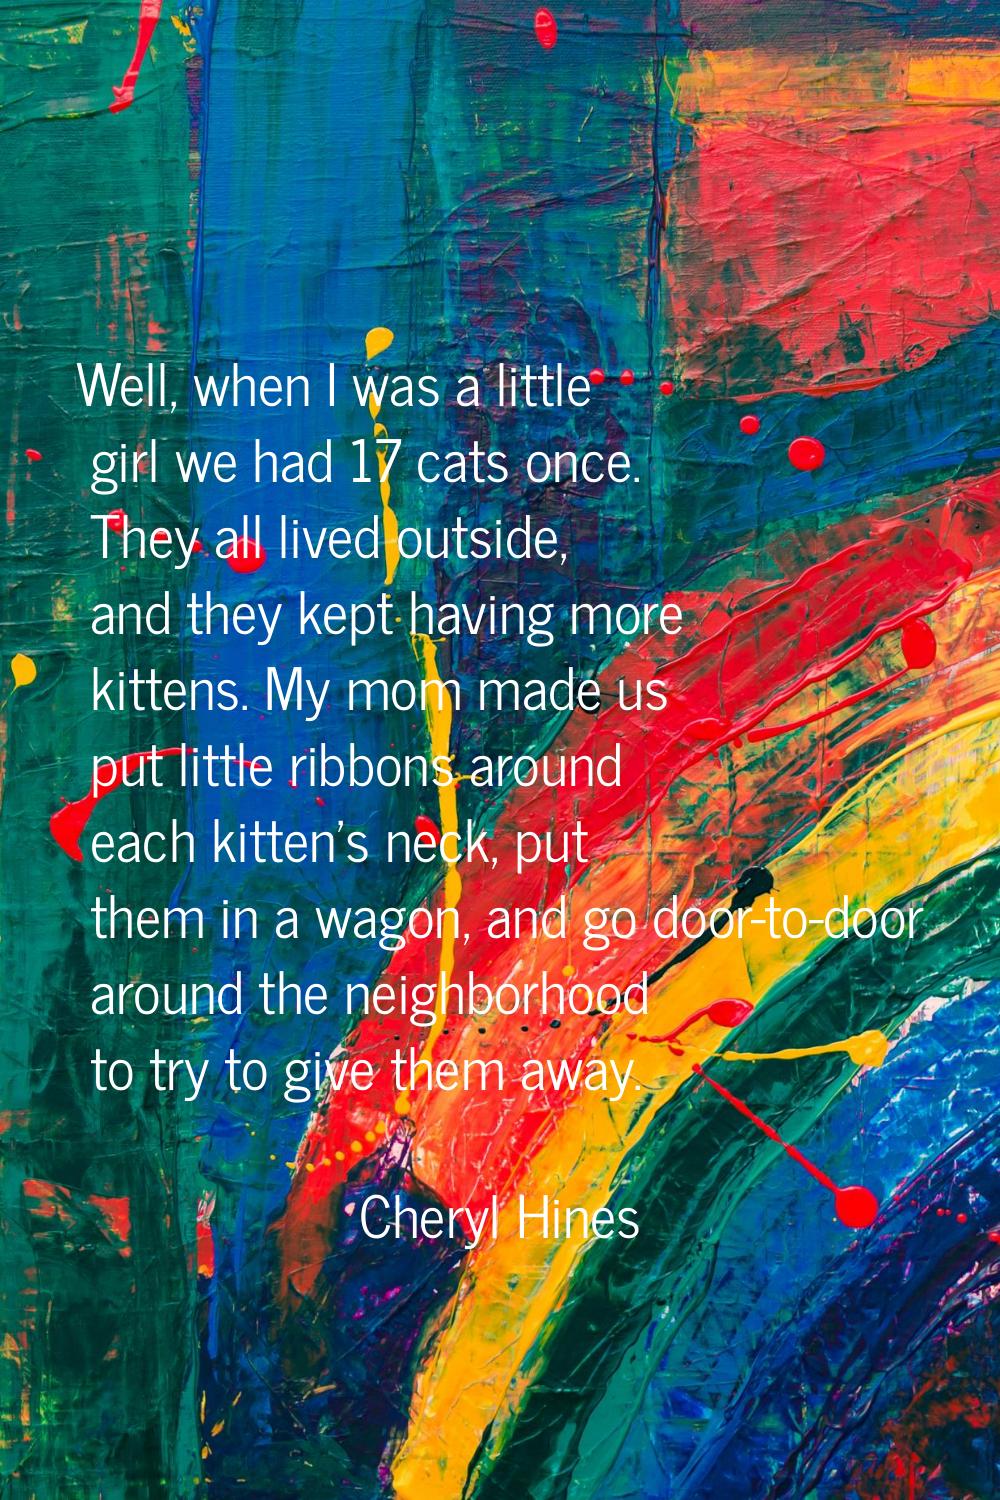 Well, when I was a little girl we had 17 cats once. They all lived outside, and they kept having mo